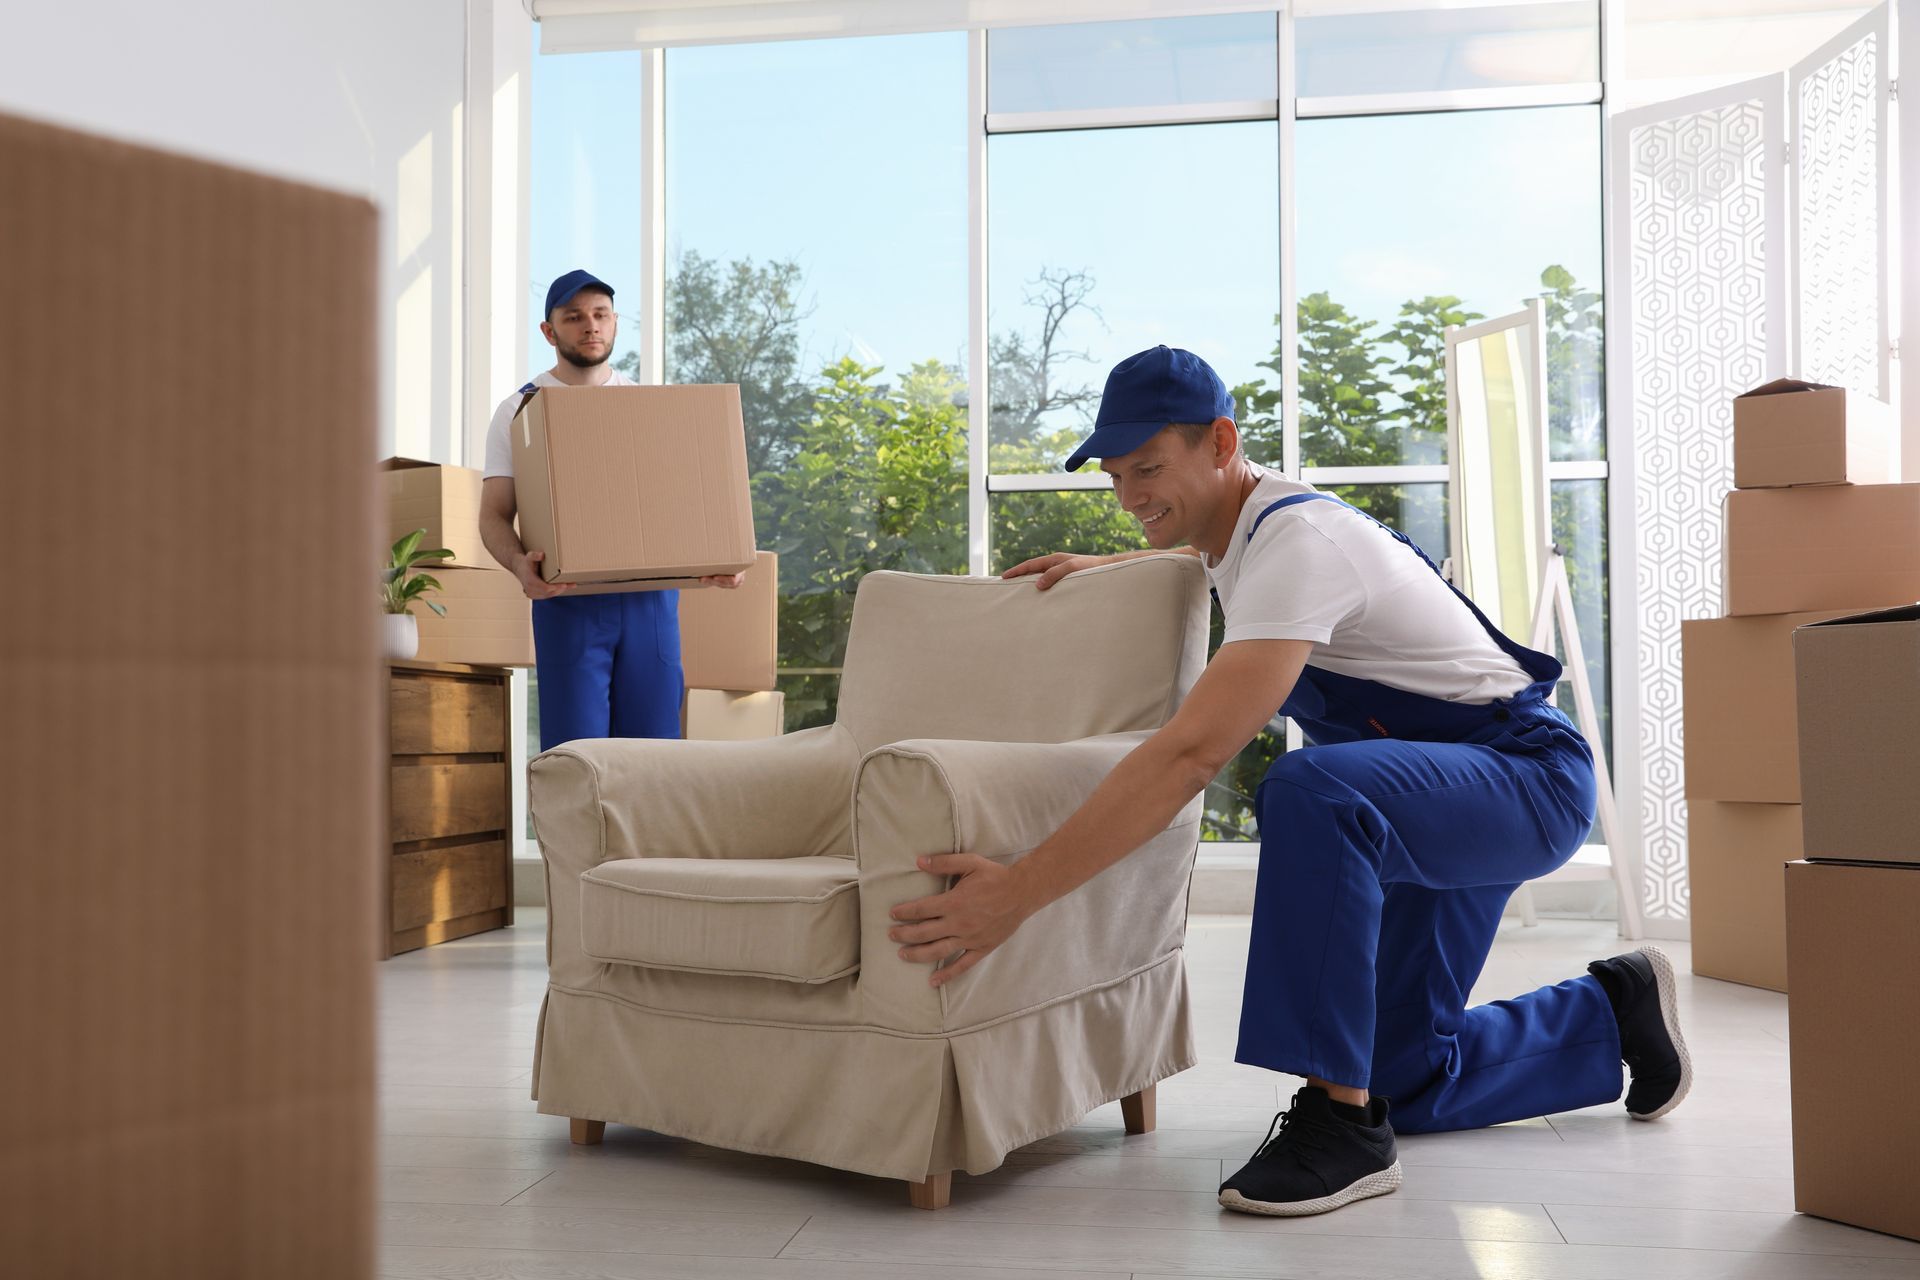 two men are moving boxes in a living room .